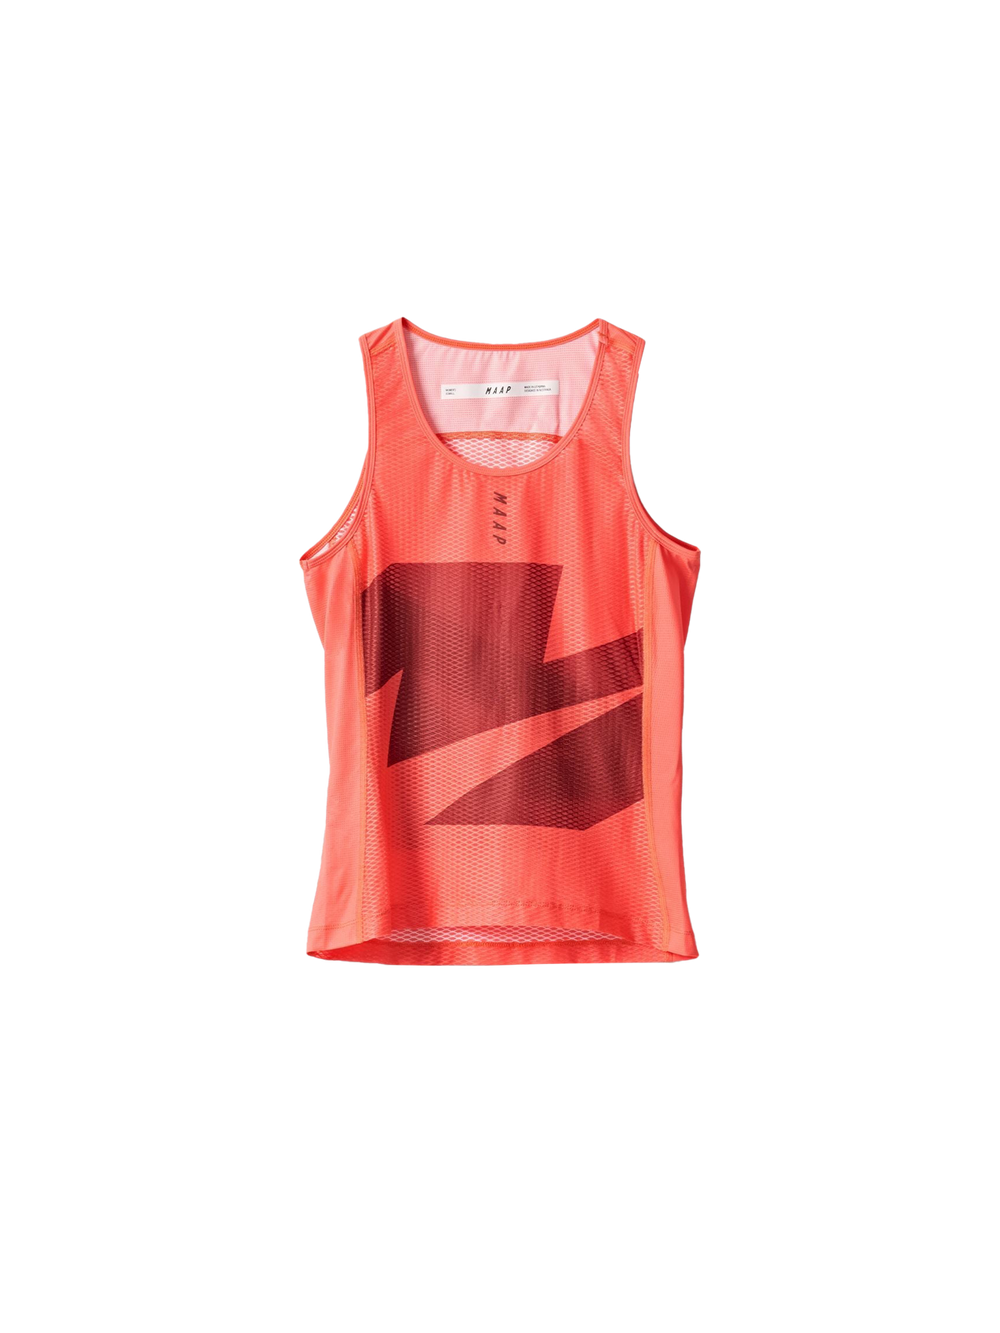 Product Image for Women's Evolve Team Base Layer